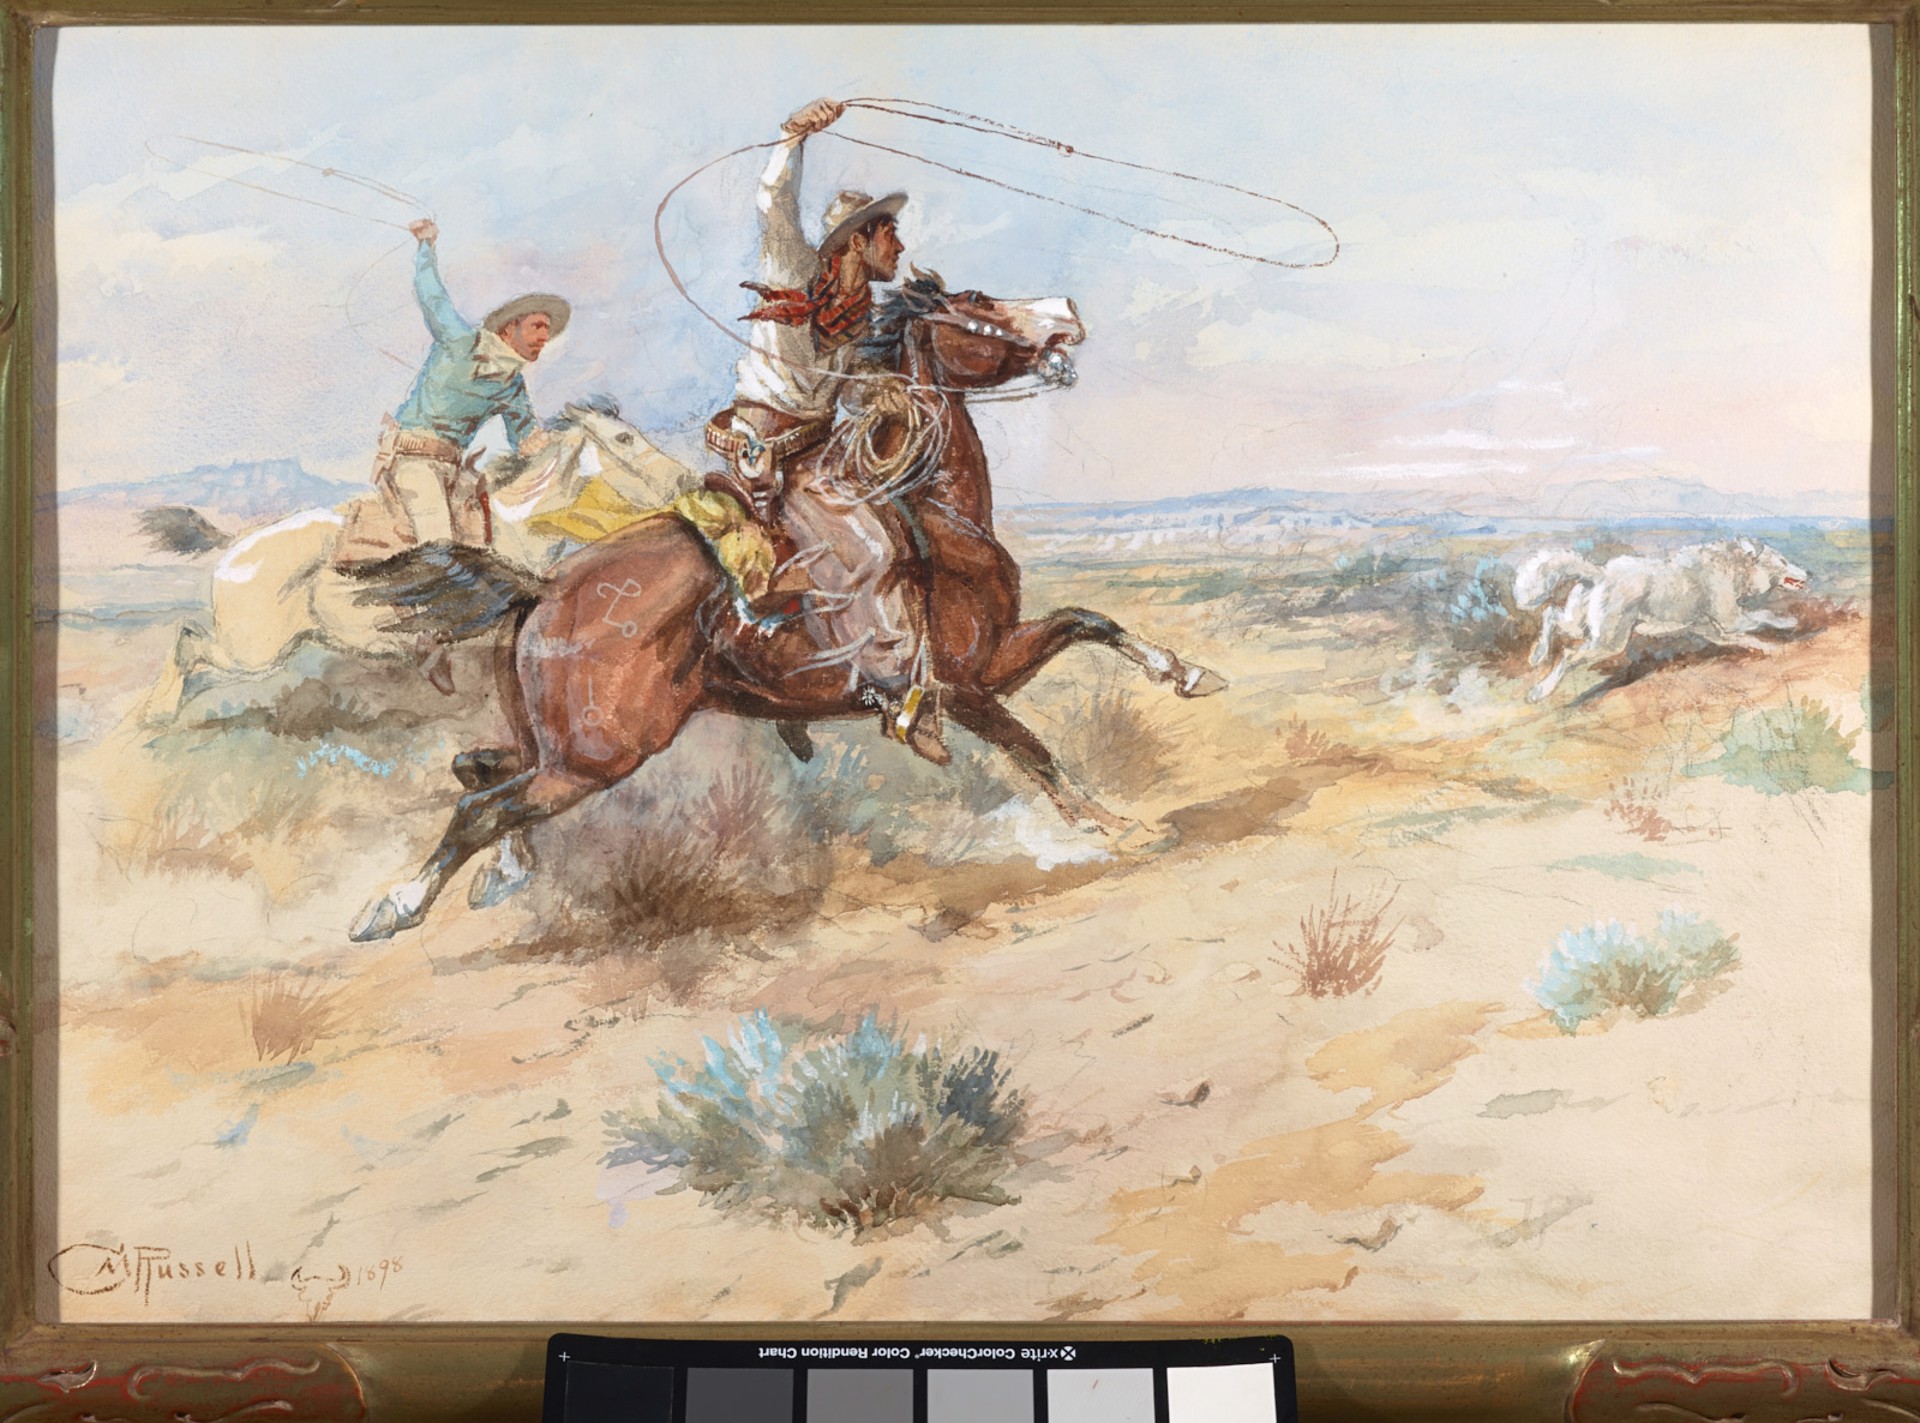 Roping a White Wolf by Charles M. Russell